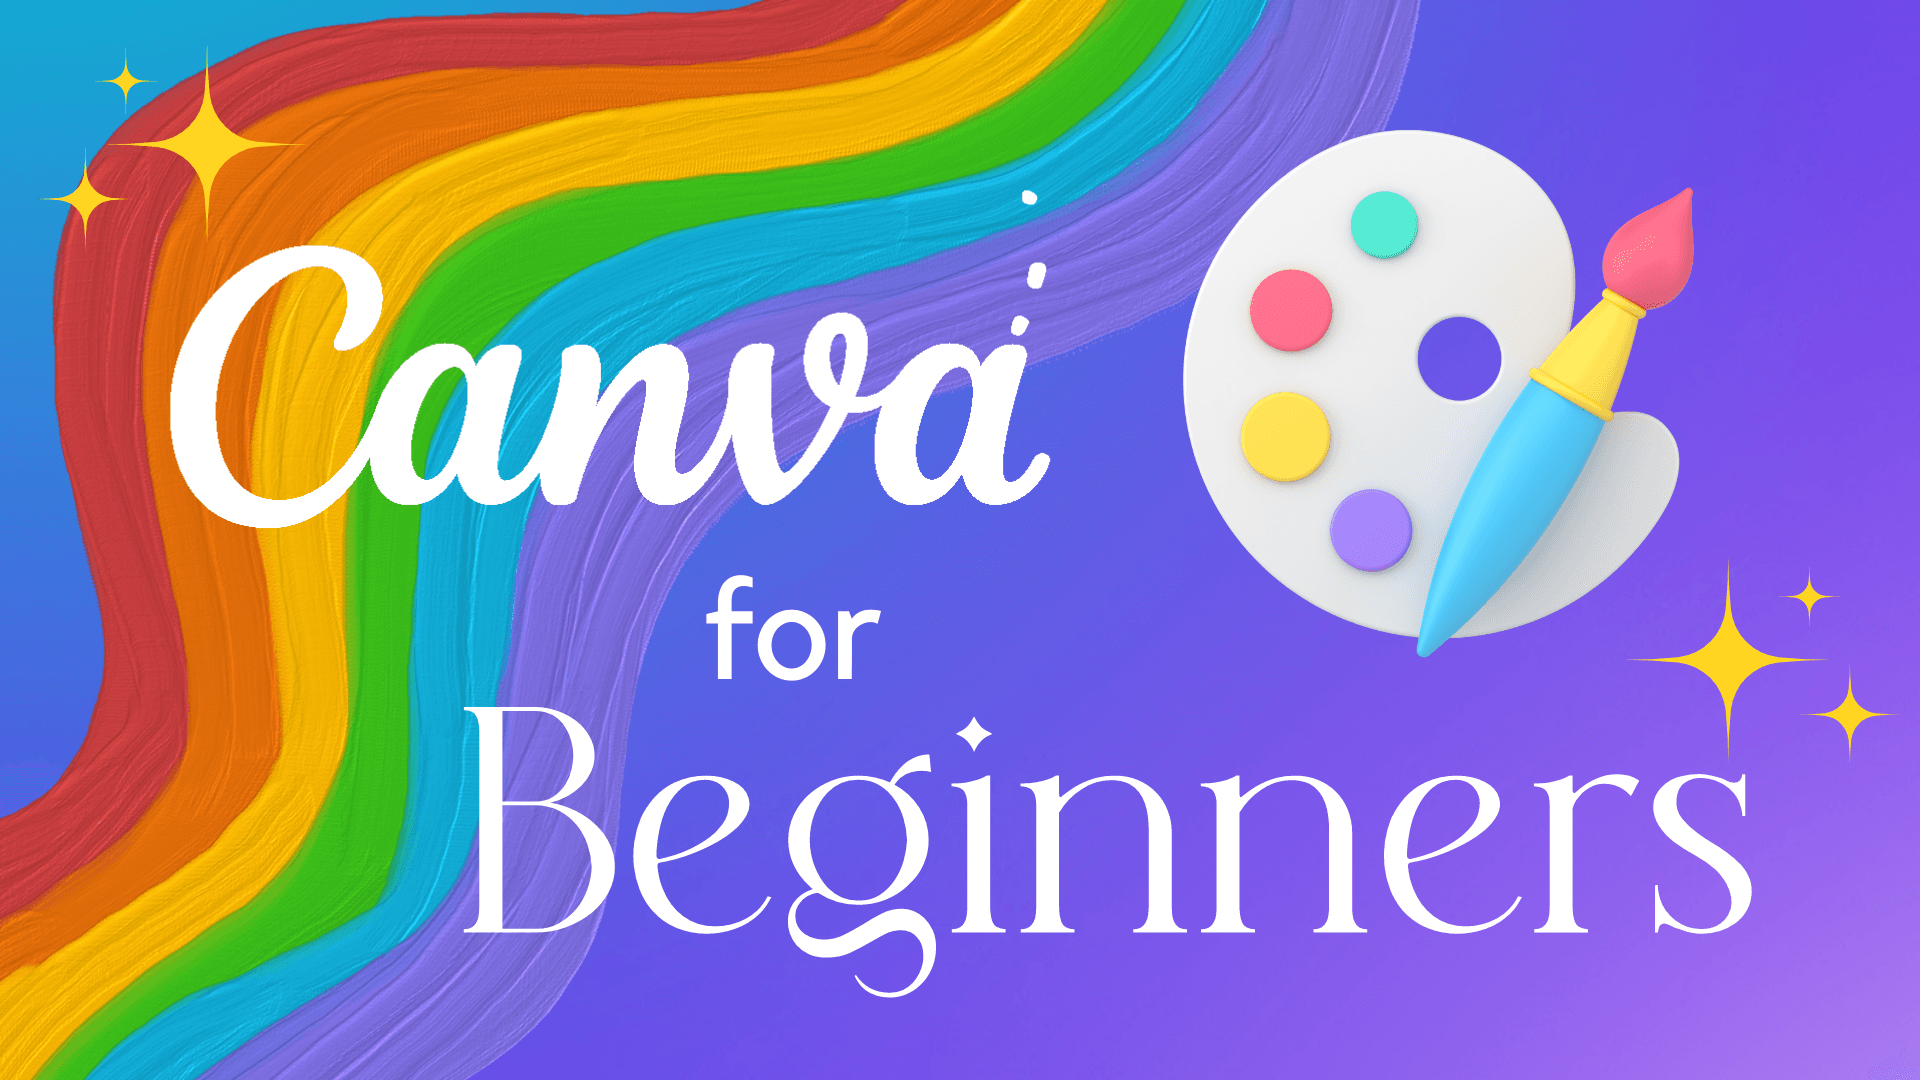 Cover image of Canva For Beginners